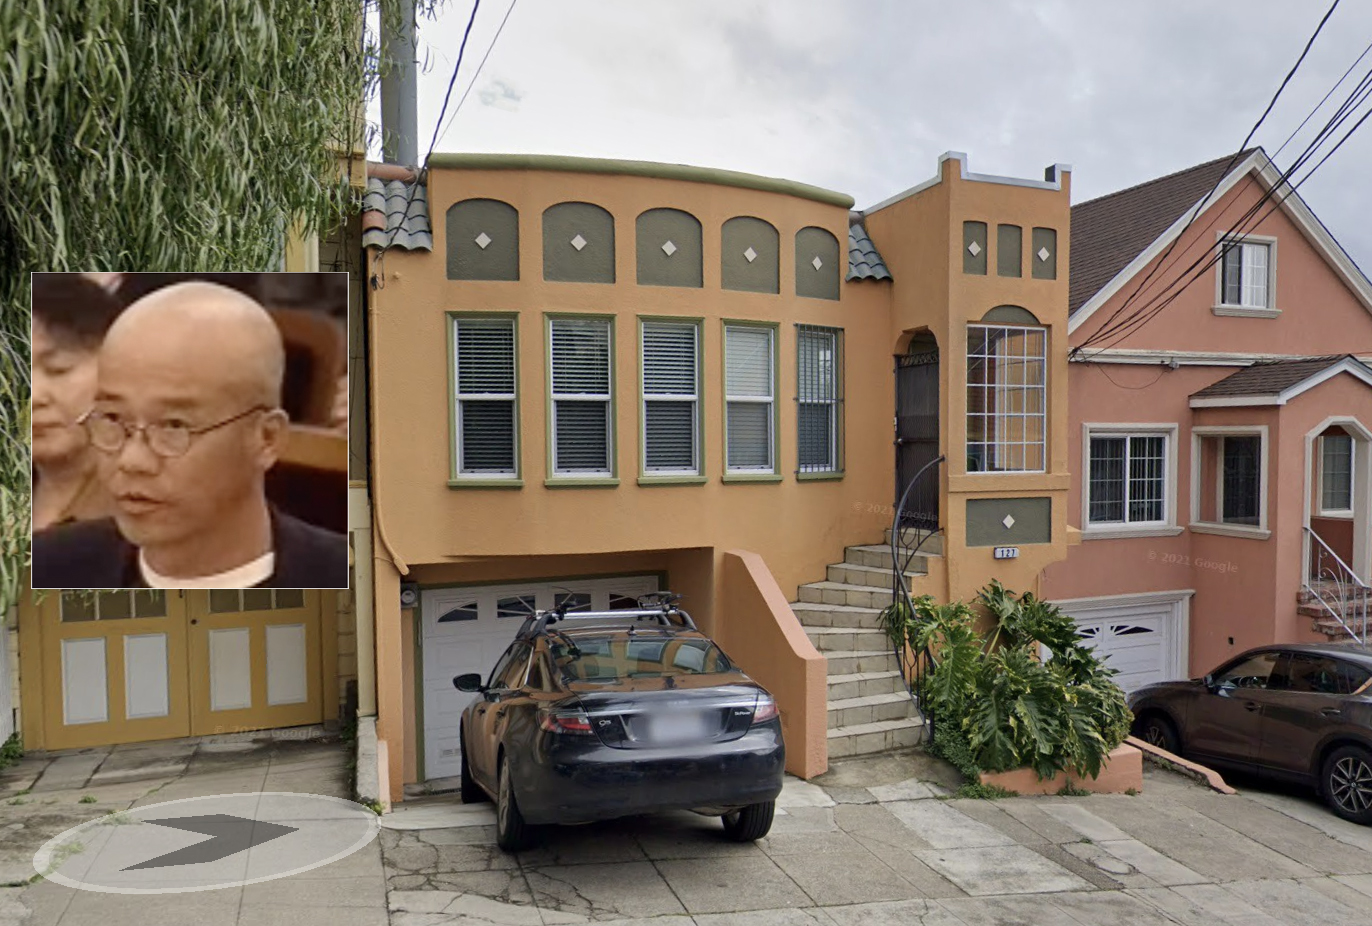 A picture of a house with a man's head nearby.